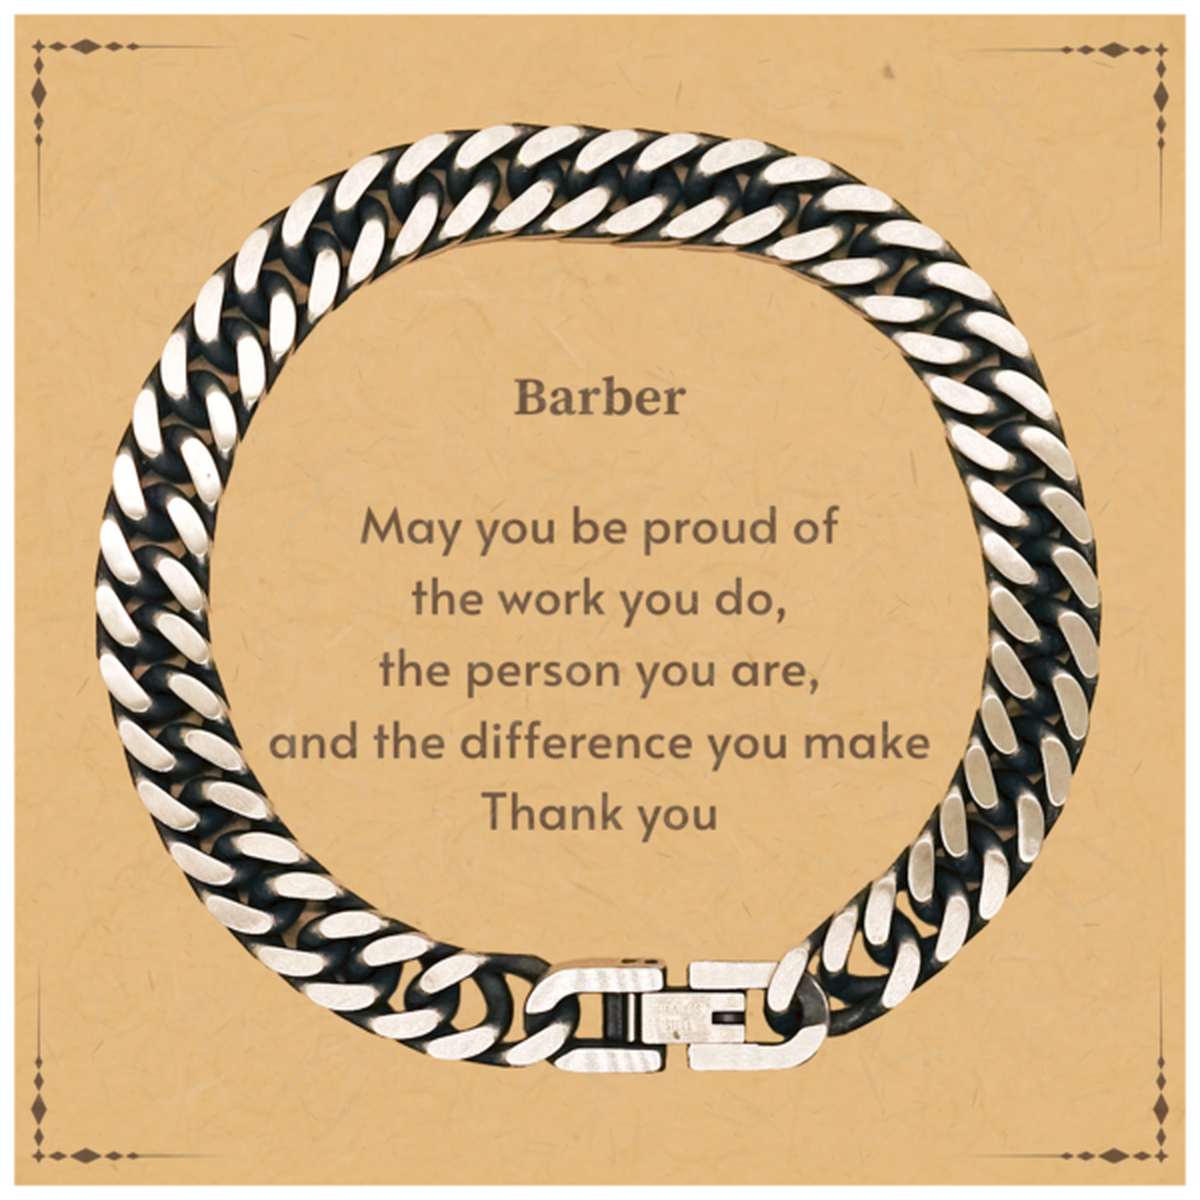 Heartwarming Cuban Link Chain Bracelet Retirement Coworkers Gifts for Barber, Barber May You be proud of the work you do, the person you are Gifts for Boss Men Women Friends